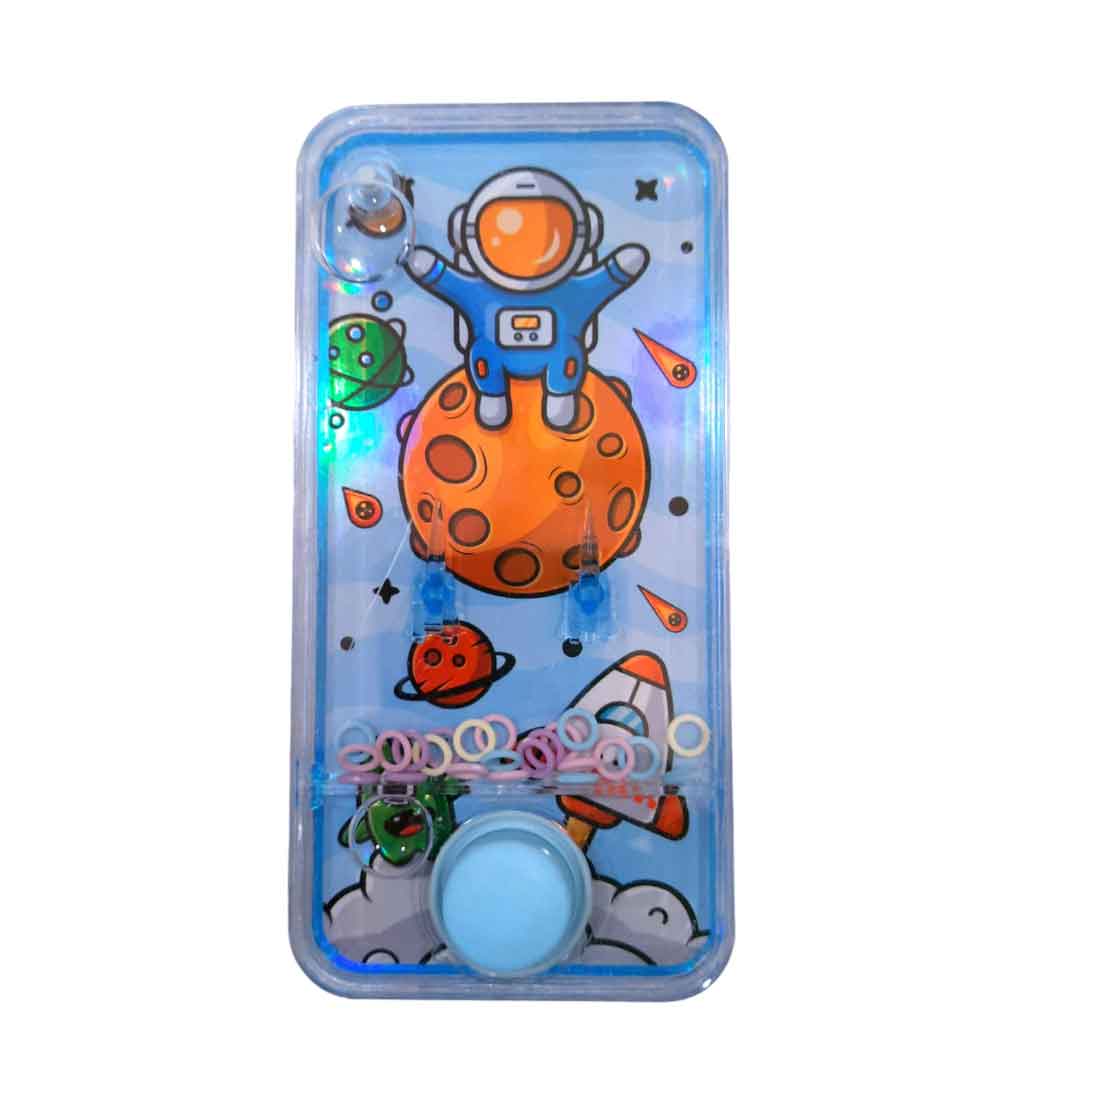 YEUHTLL 1 PCS squishy Water Ring Toss Squeeze Toy Child Handheld Game  Machine Parent-Child Interactive Antistress Game Toys For Children -  Walmart.com